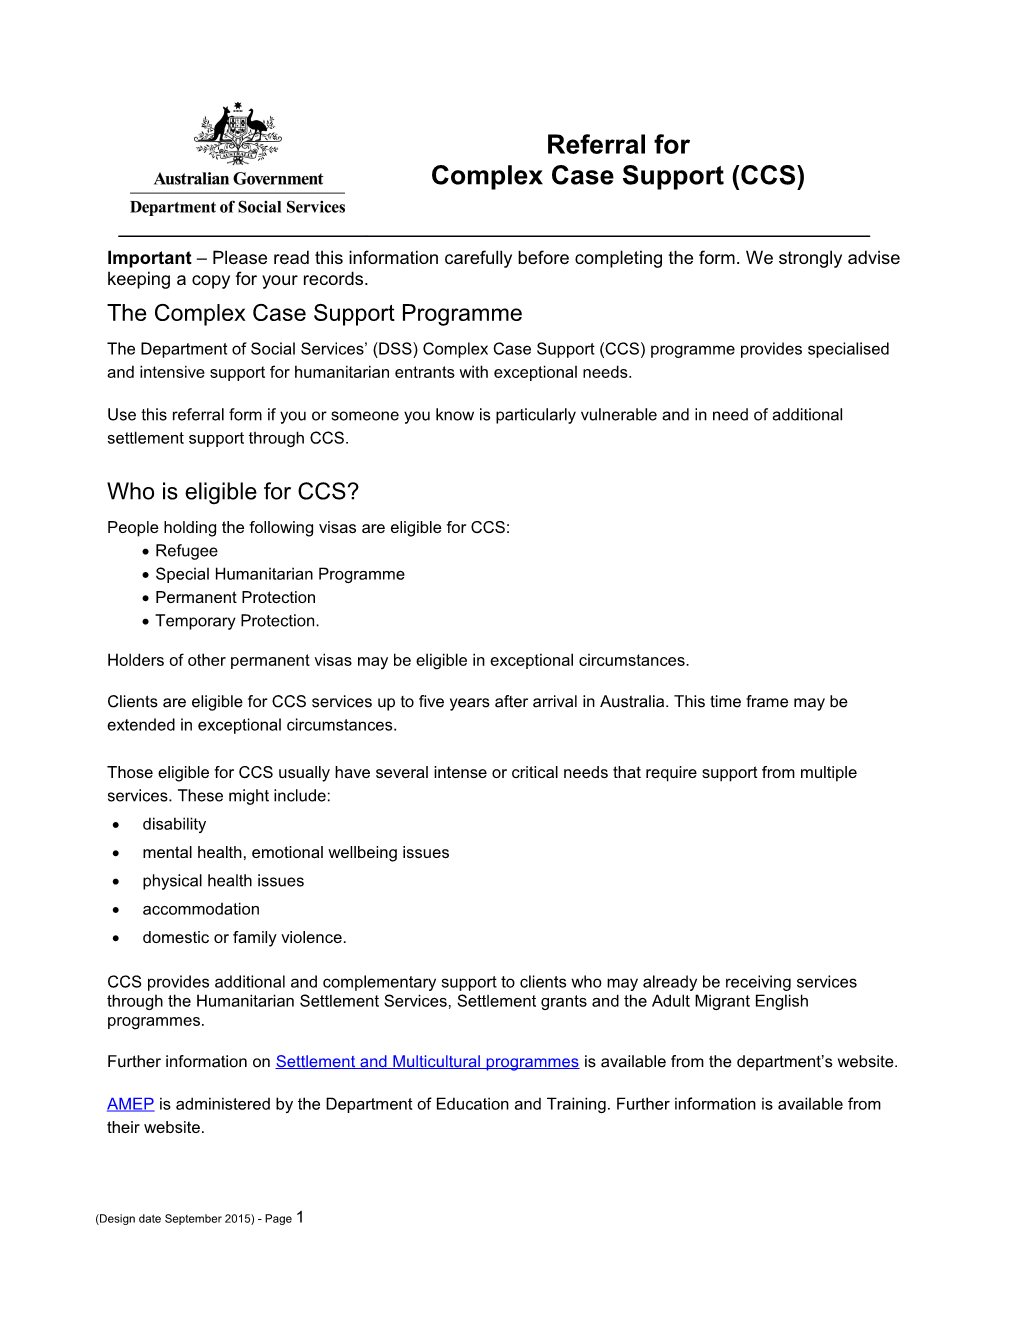 1292 - Referral for Complex Case Support (CCS)